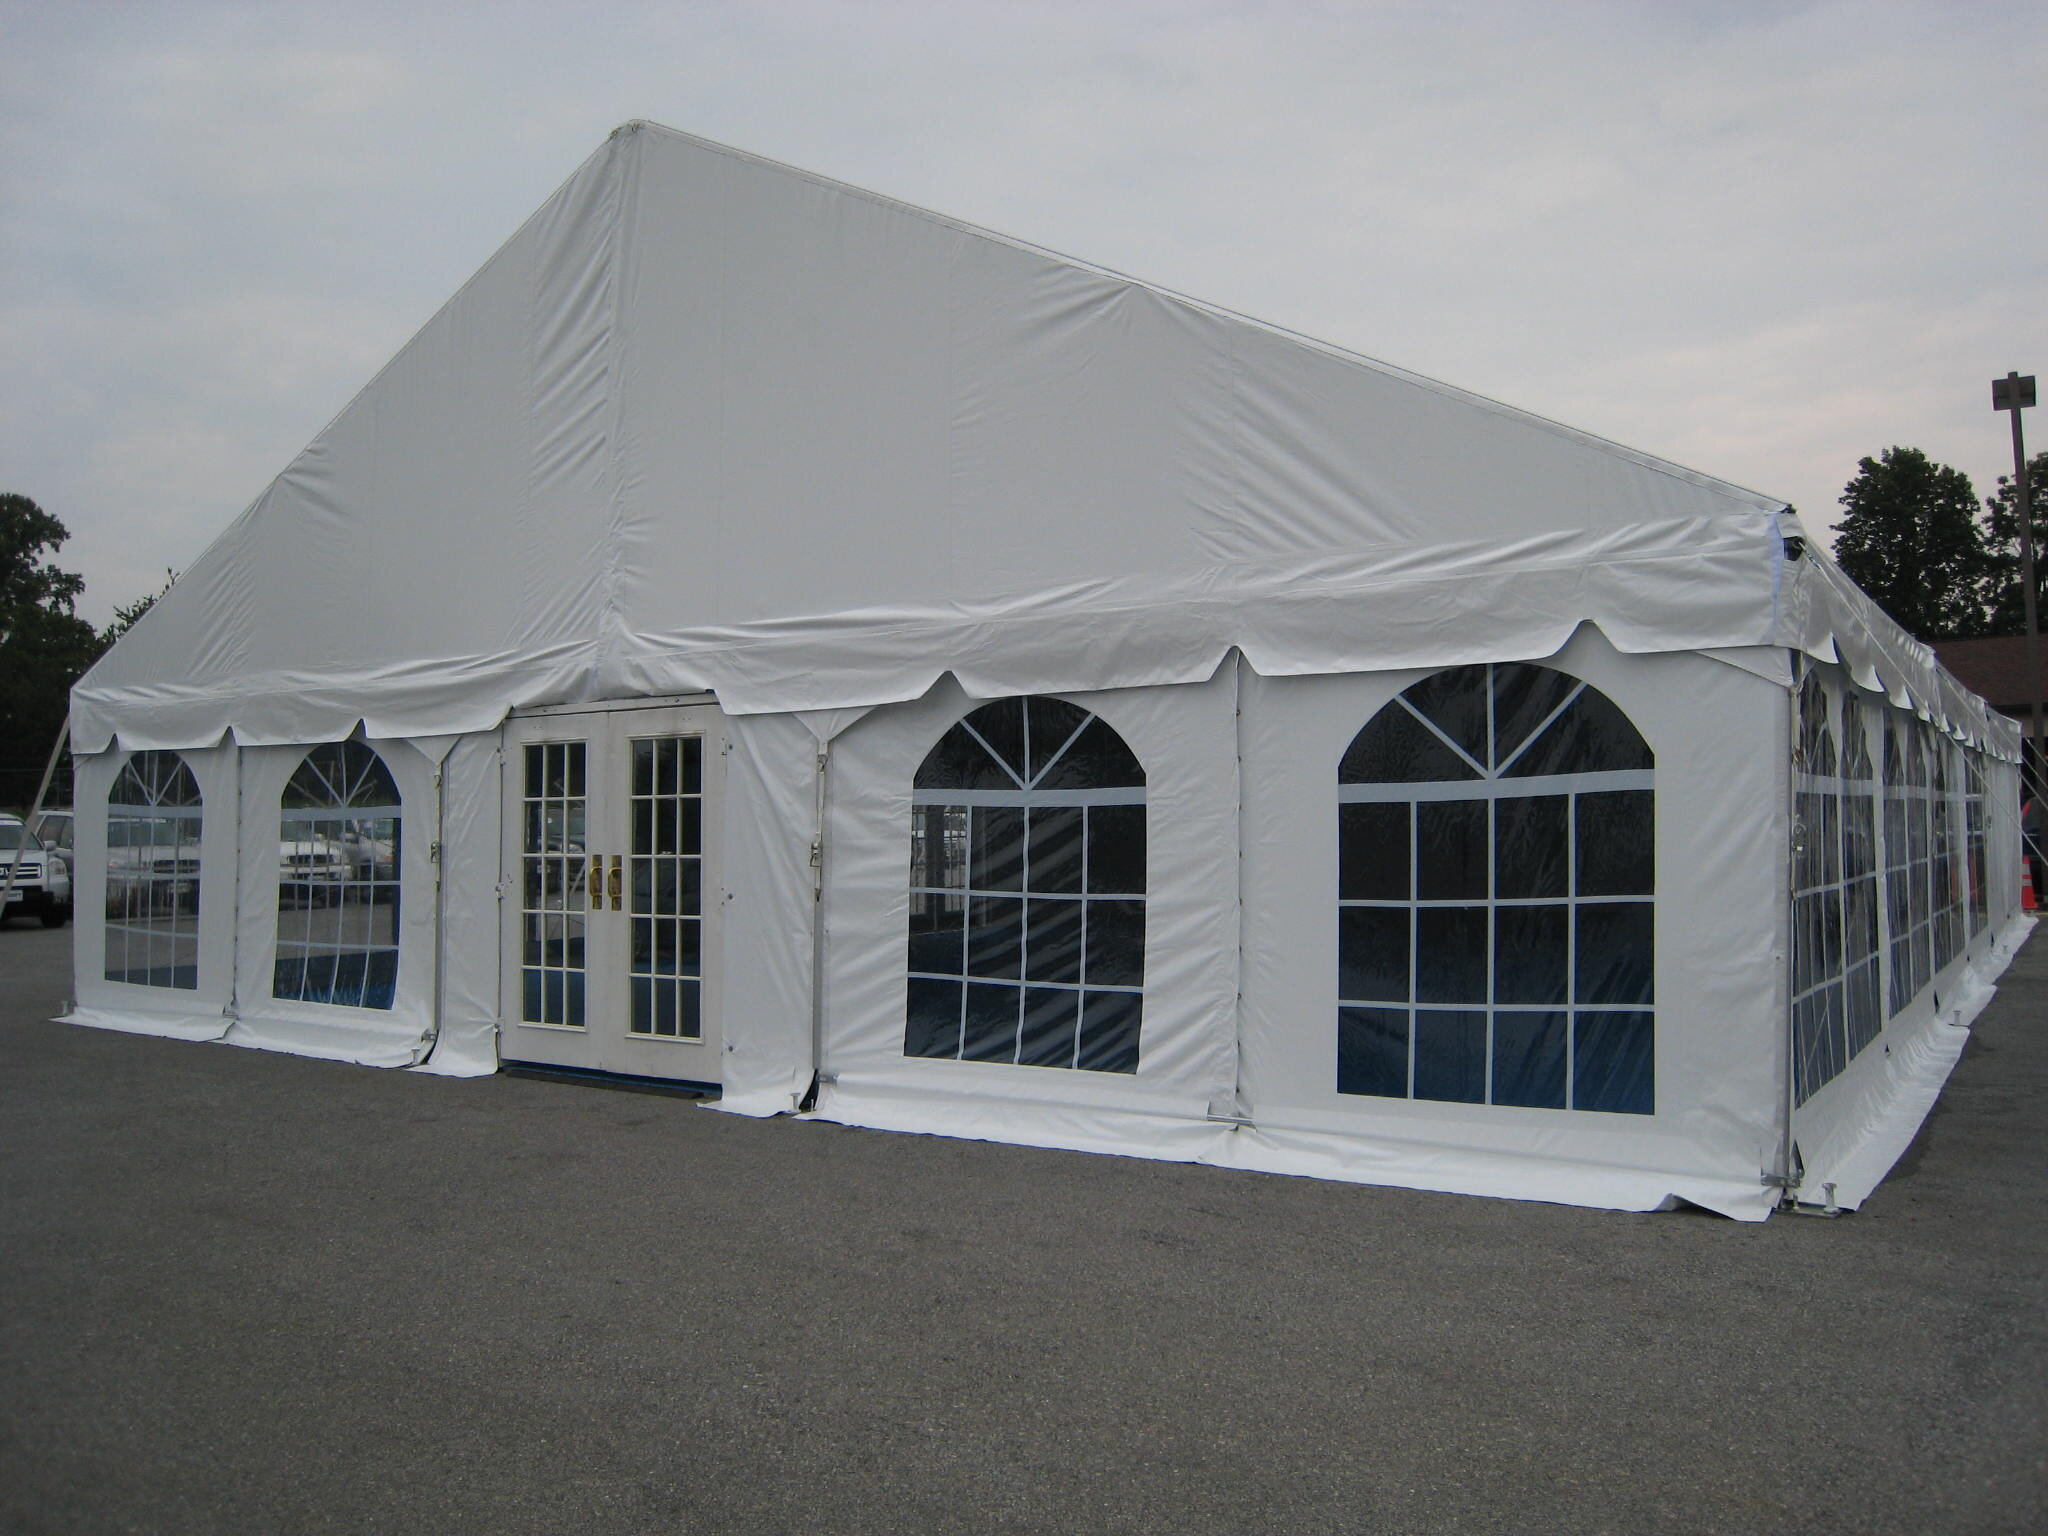 Parking lot dining tent